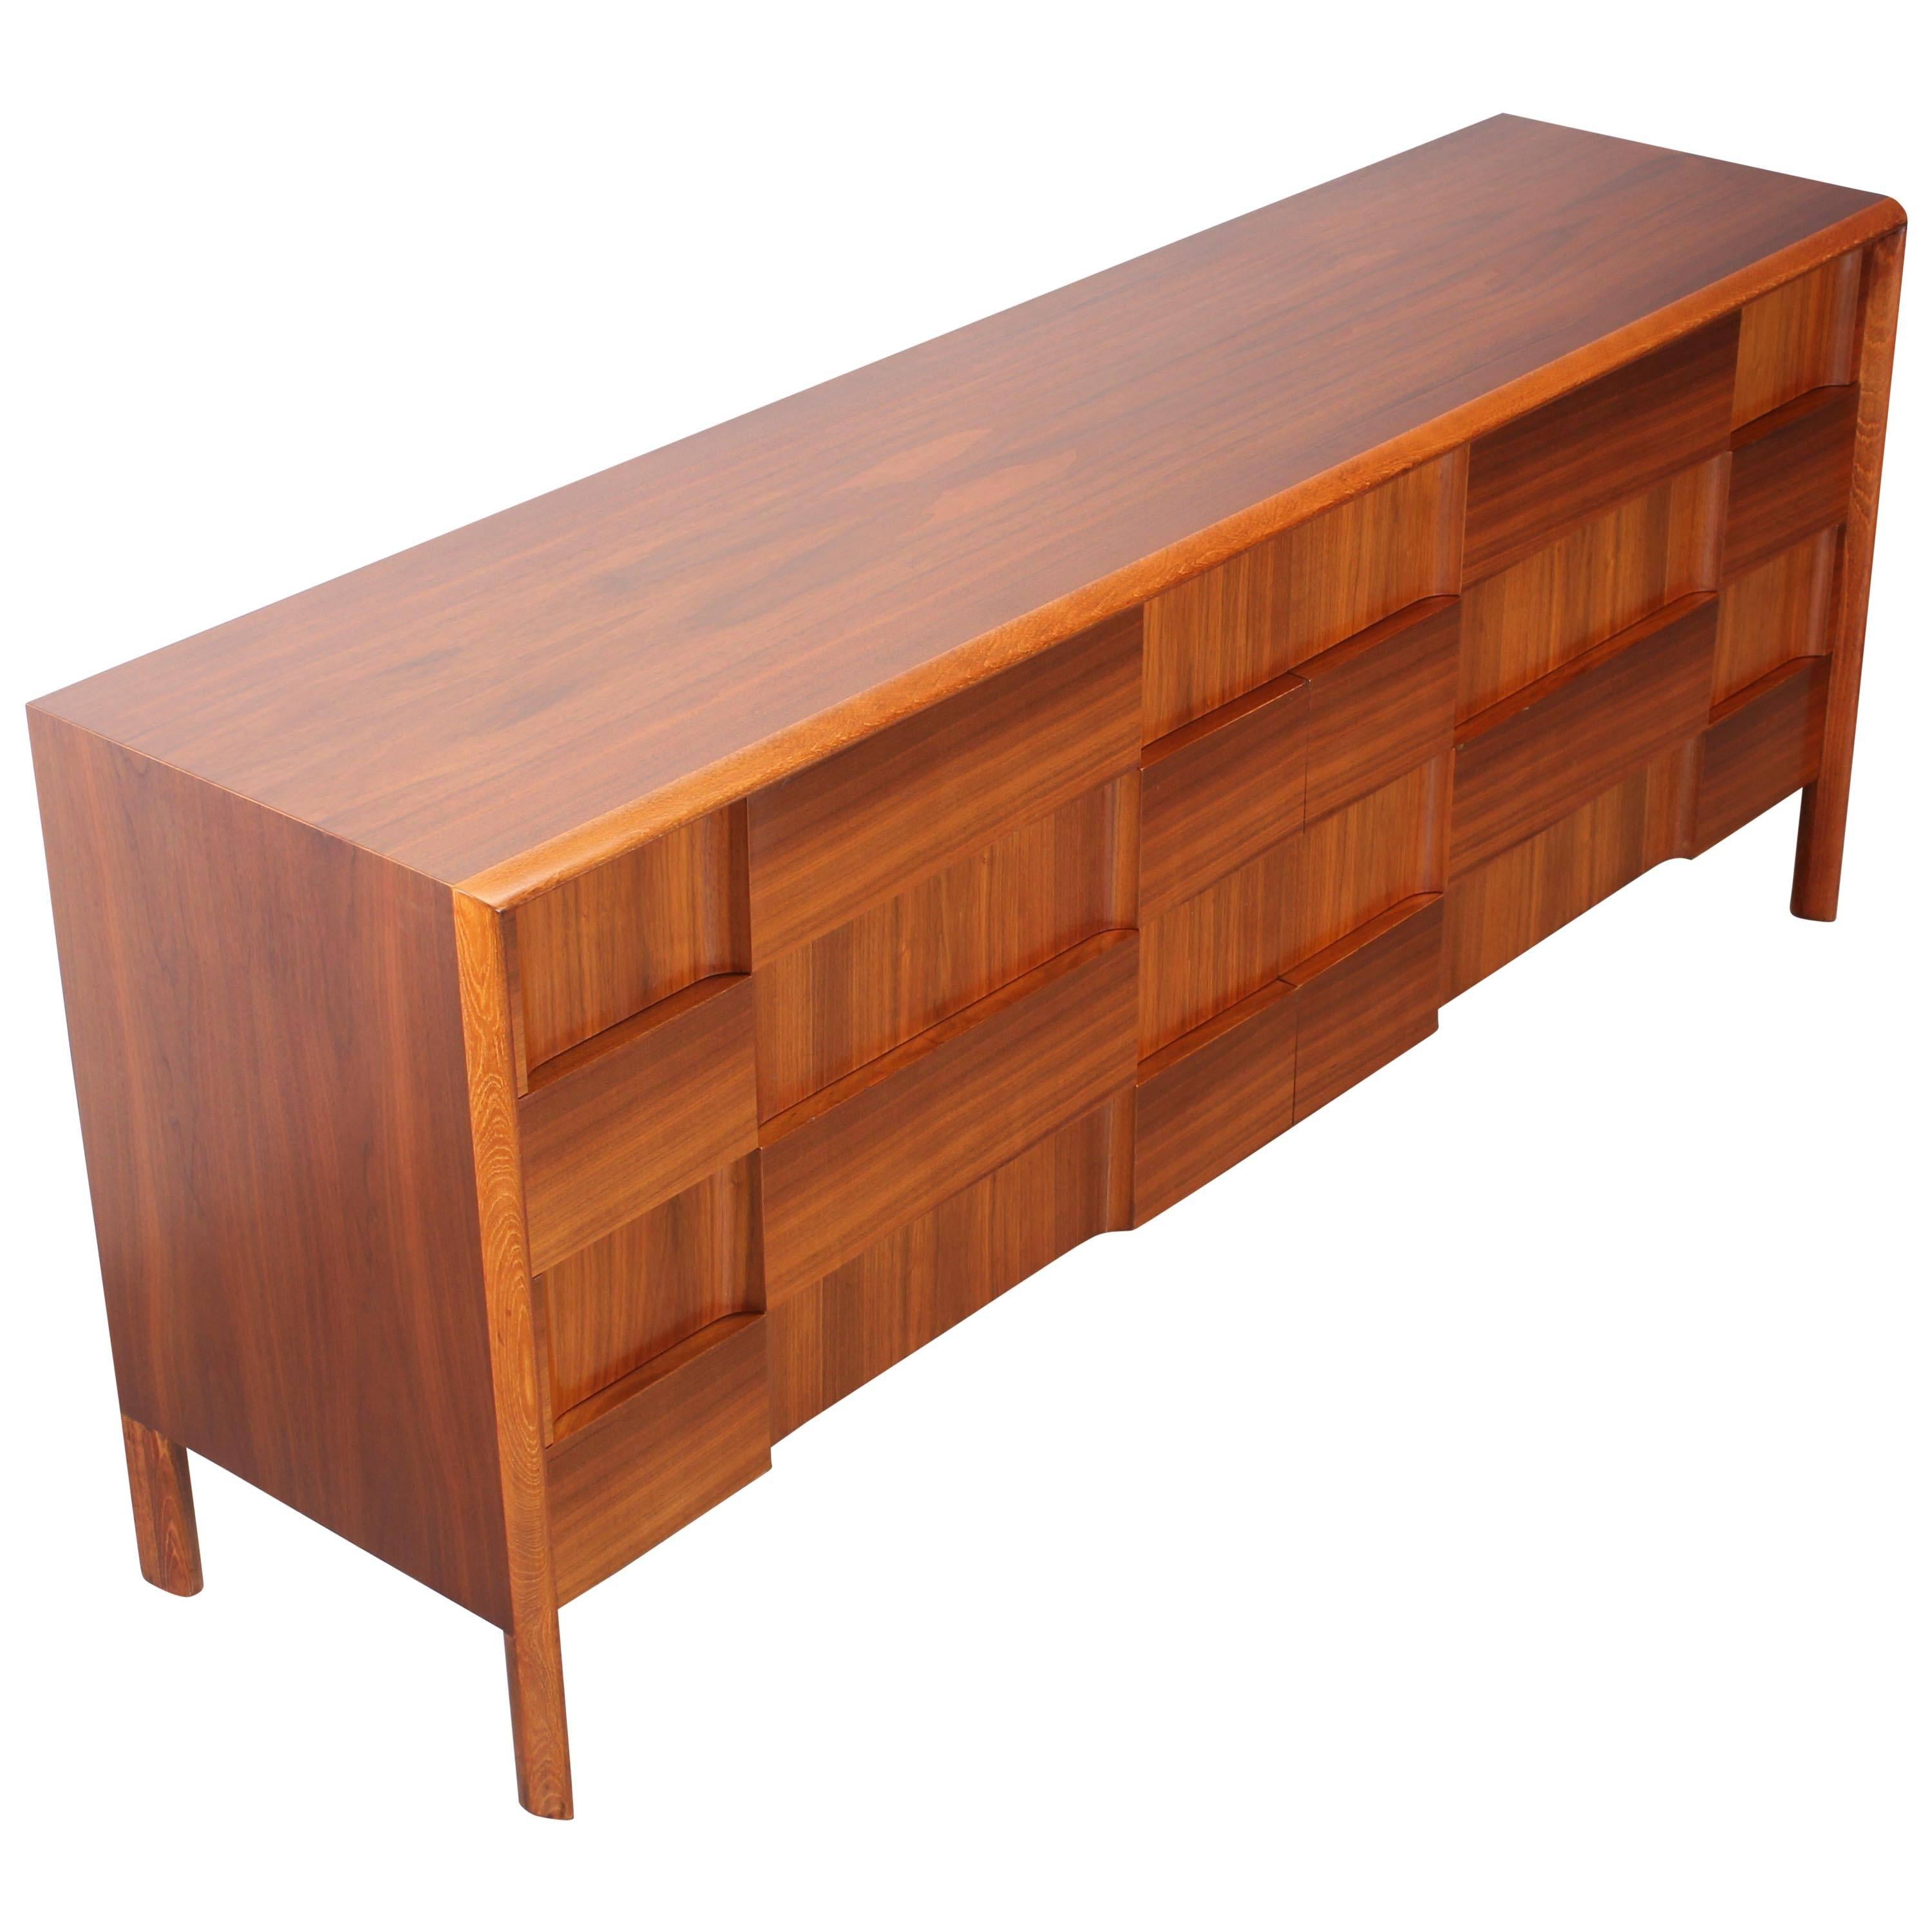 A spectacular 8 drawer relief front walnut dresser made of horizontal and vertical walnut veneer designed by Edmond Spence, made in Sweden. Edmond Spence was an American designer who was influenced by Danish Modernism in the late 1950's. This